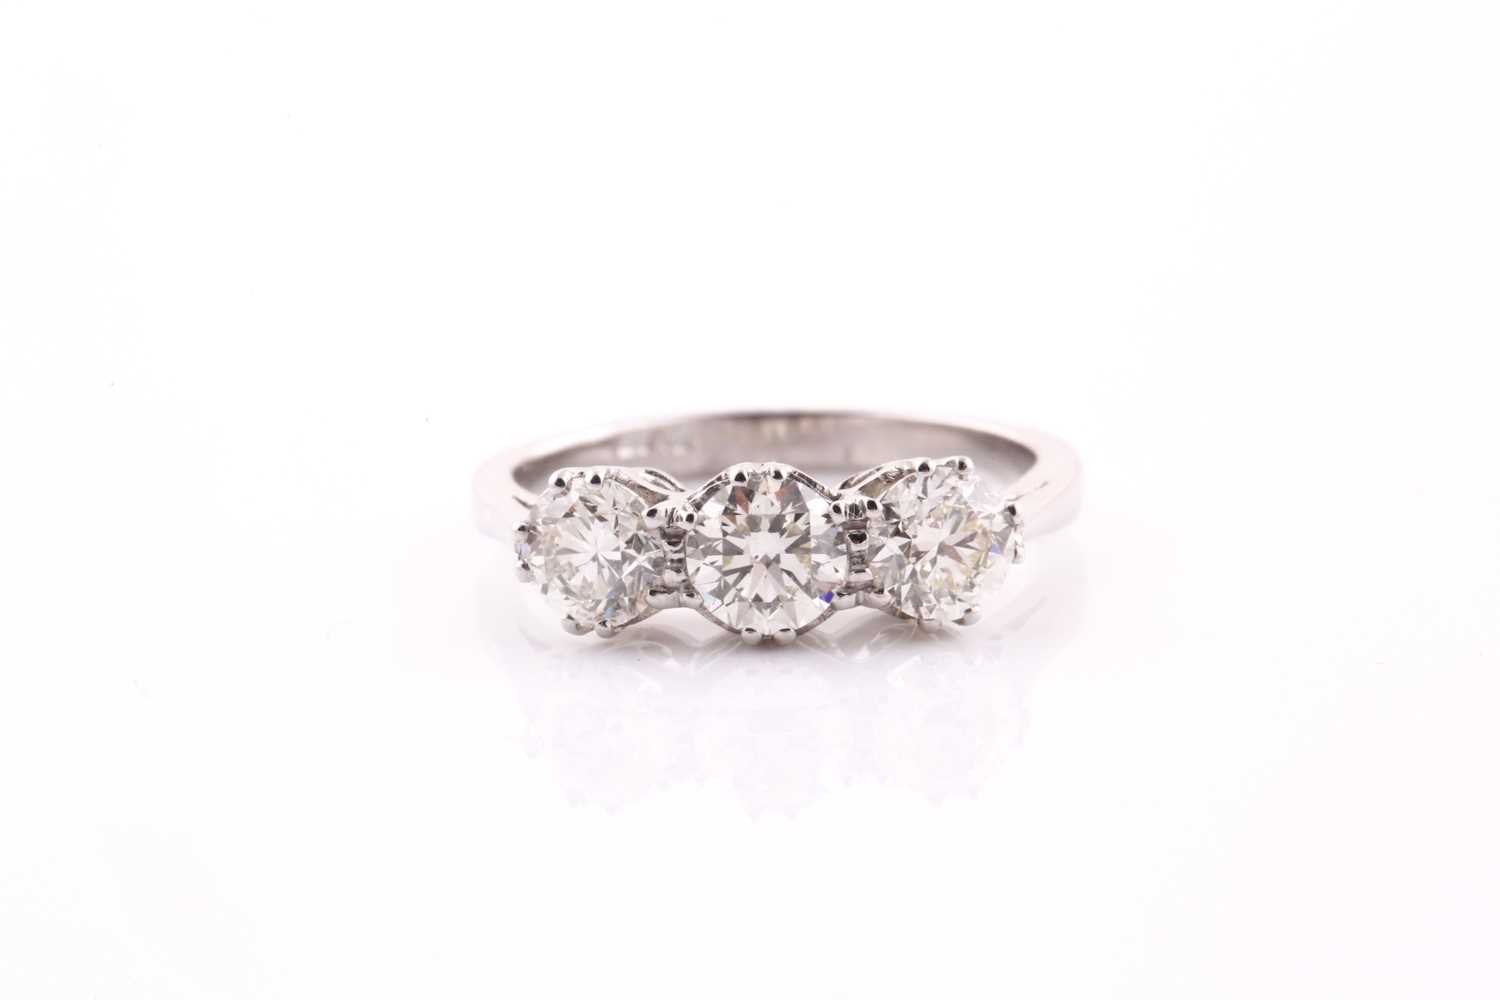 A platinum and diamond ring, set with three round brilliant-cut diamonds of approximately 1.20